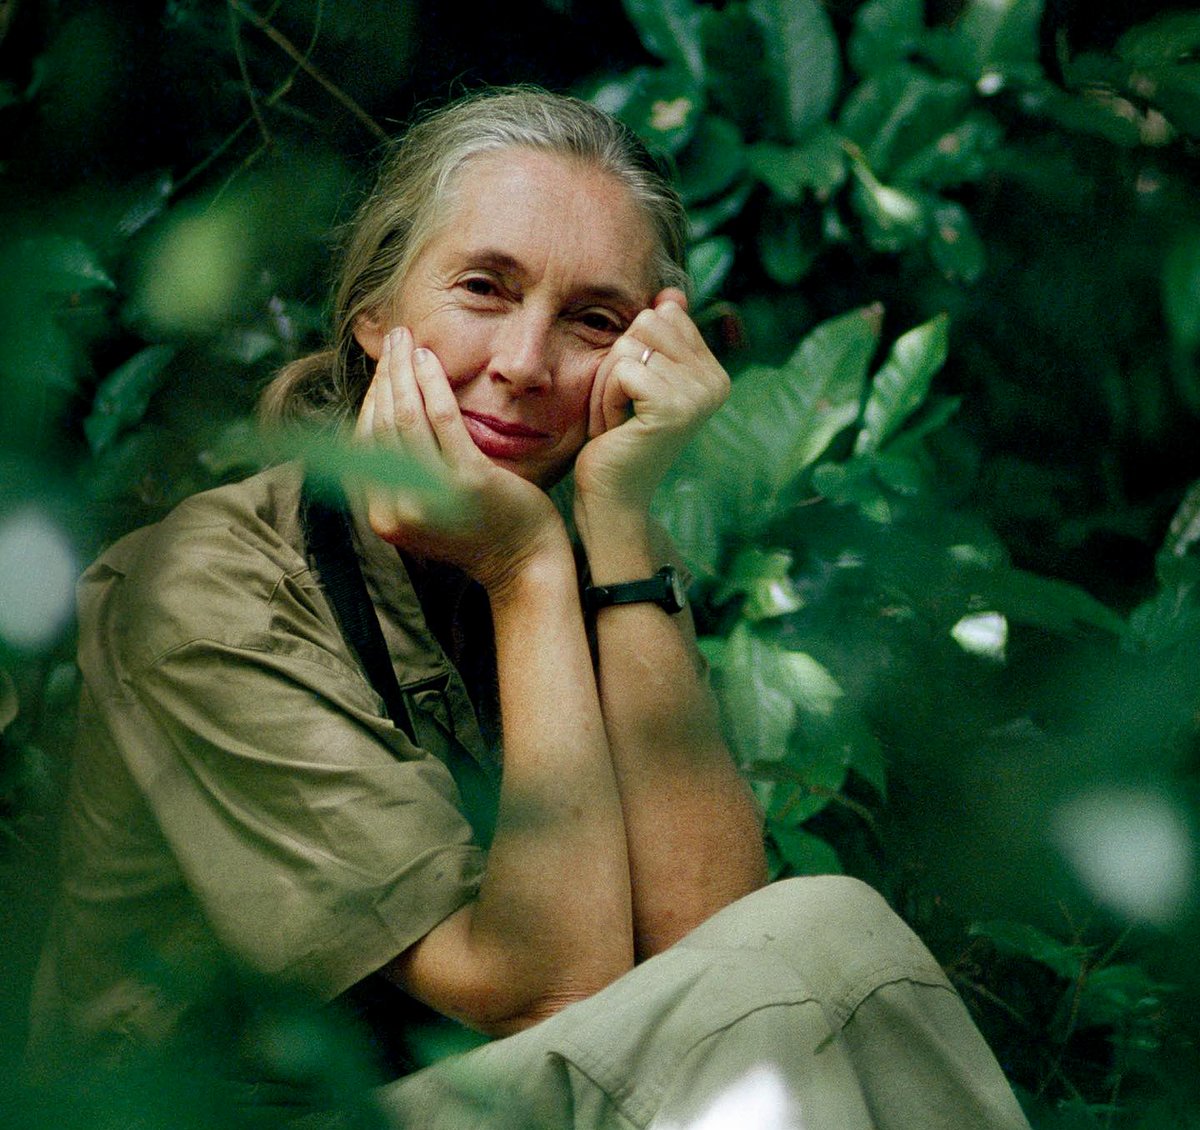 #JaneGoodallHappyBirthday. Looking forward to many more years with you at the helm of #chimp #protection and #conservation. #BeLikeJane.